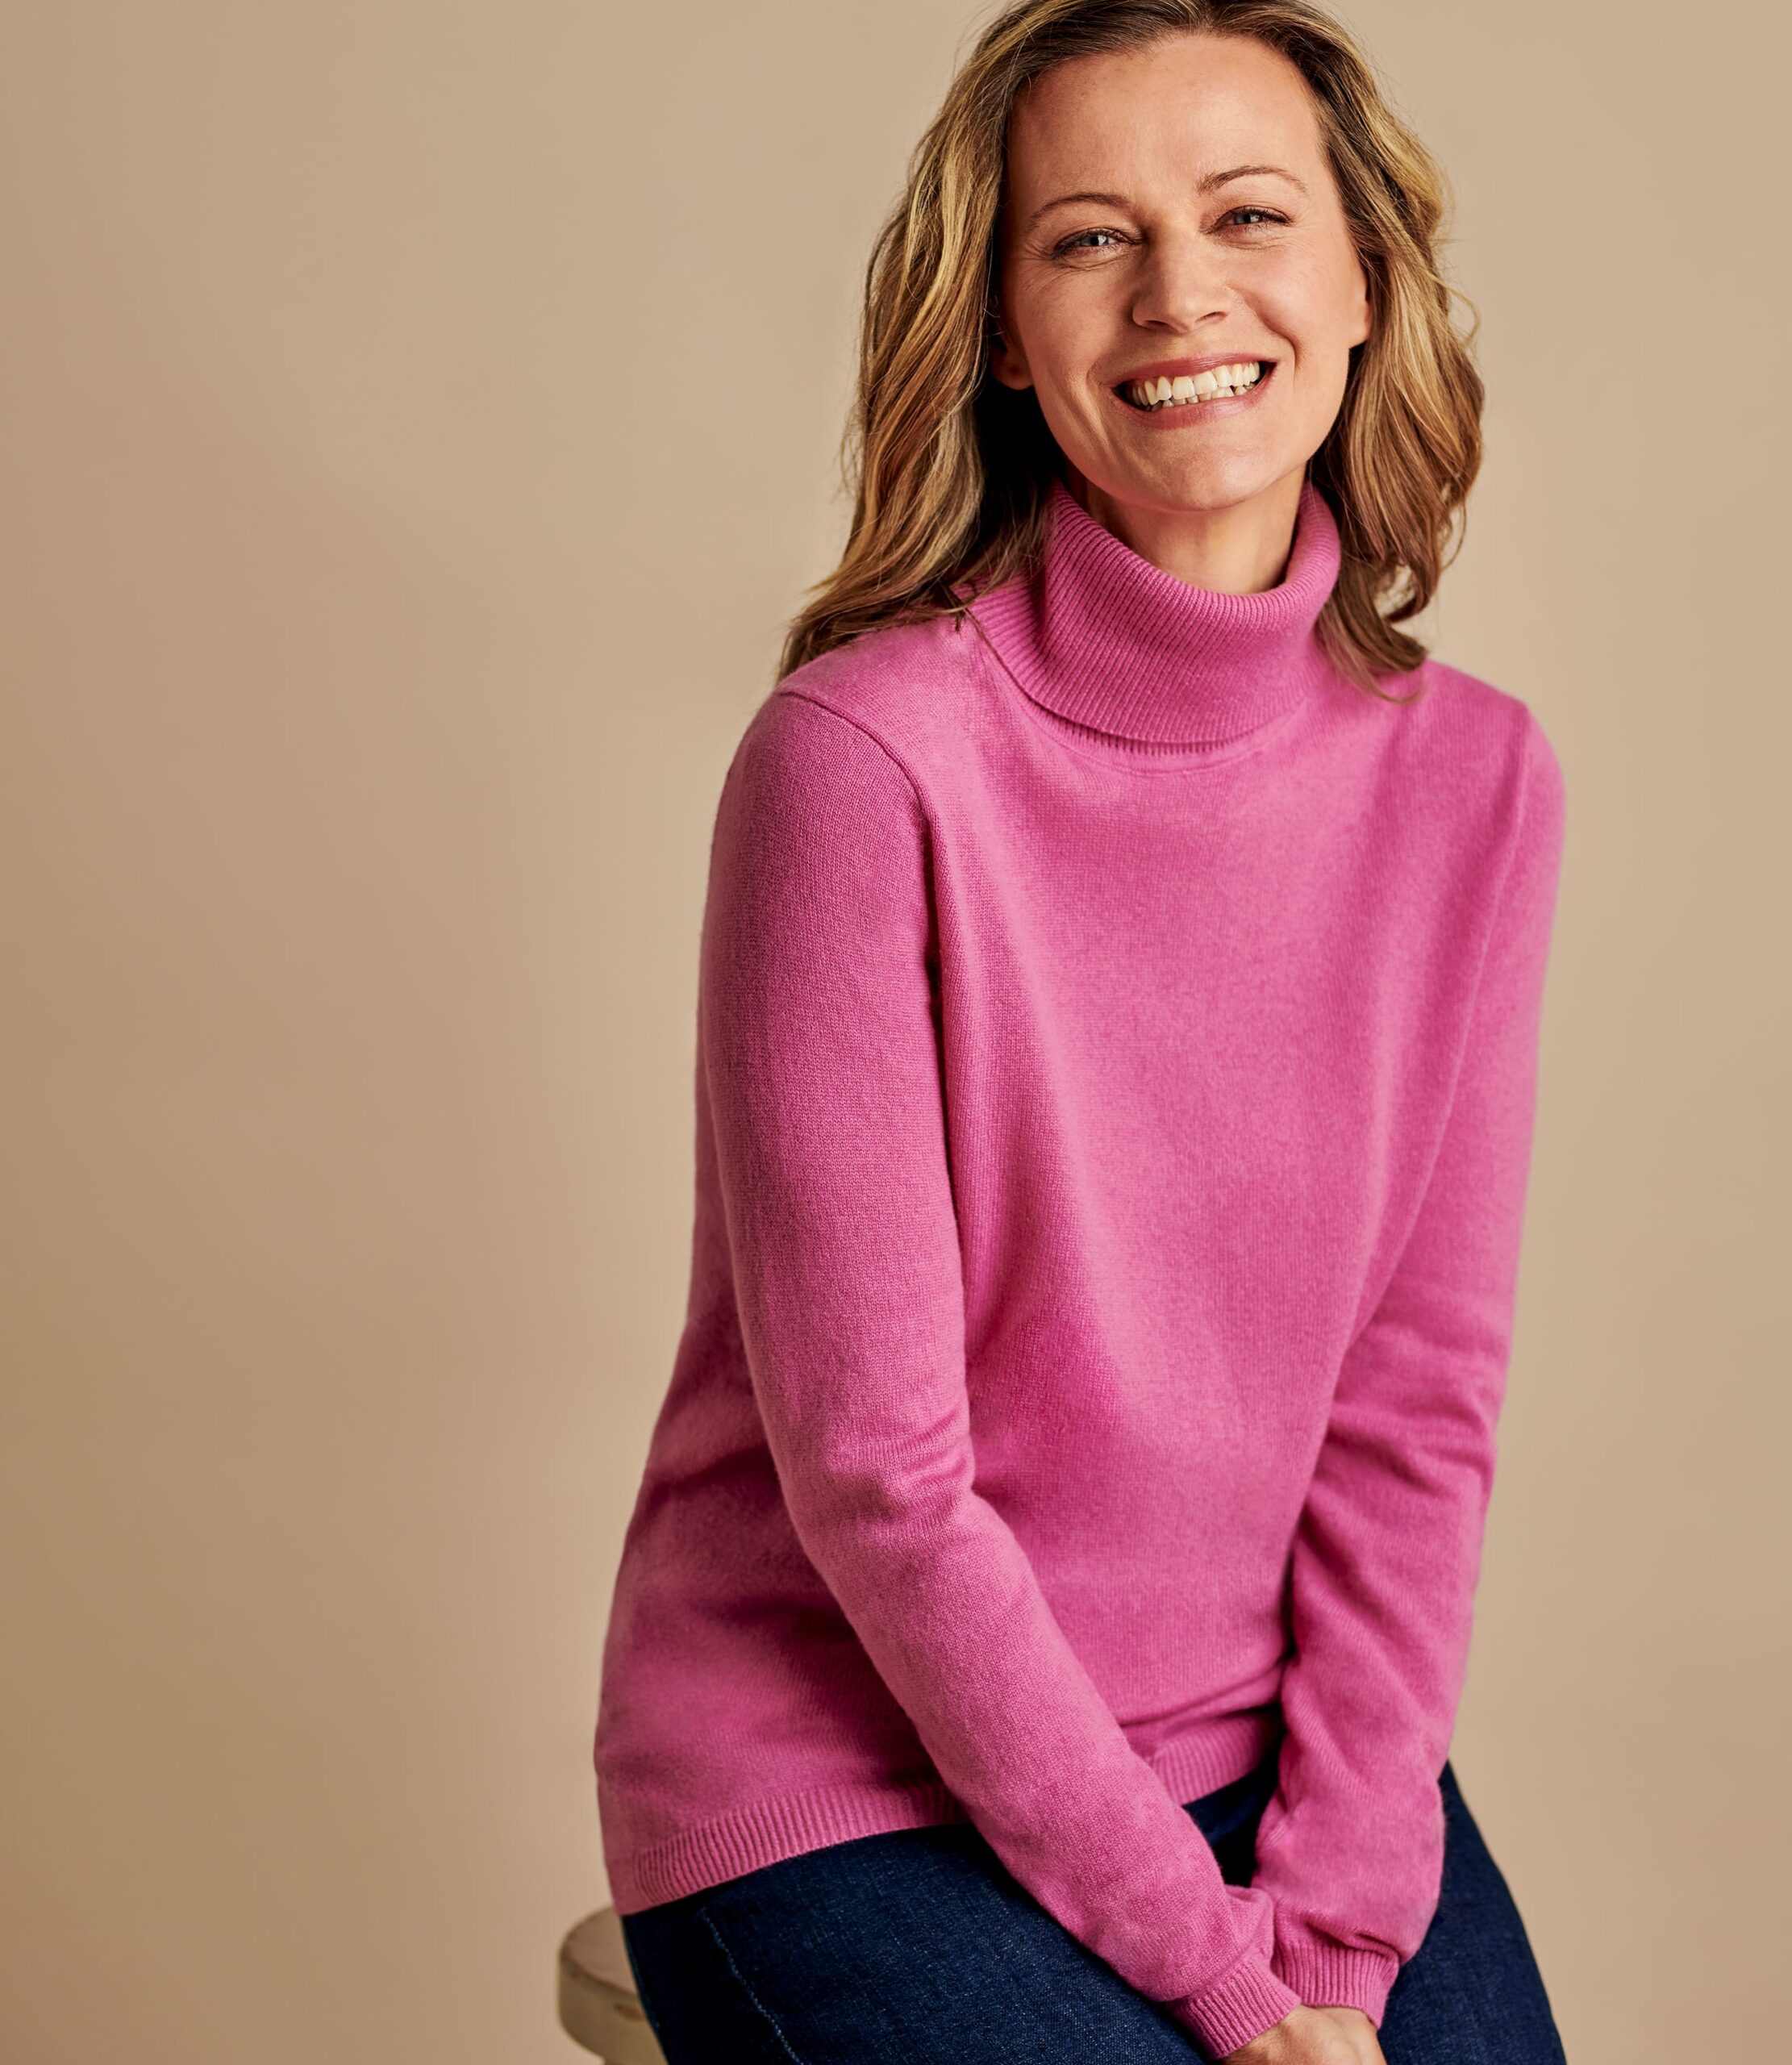 women cashmere jumpers